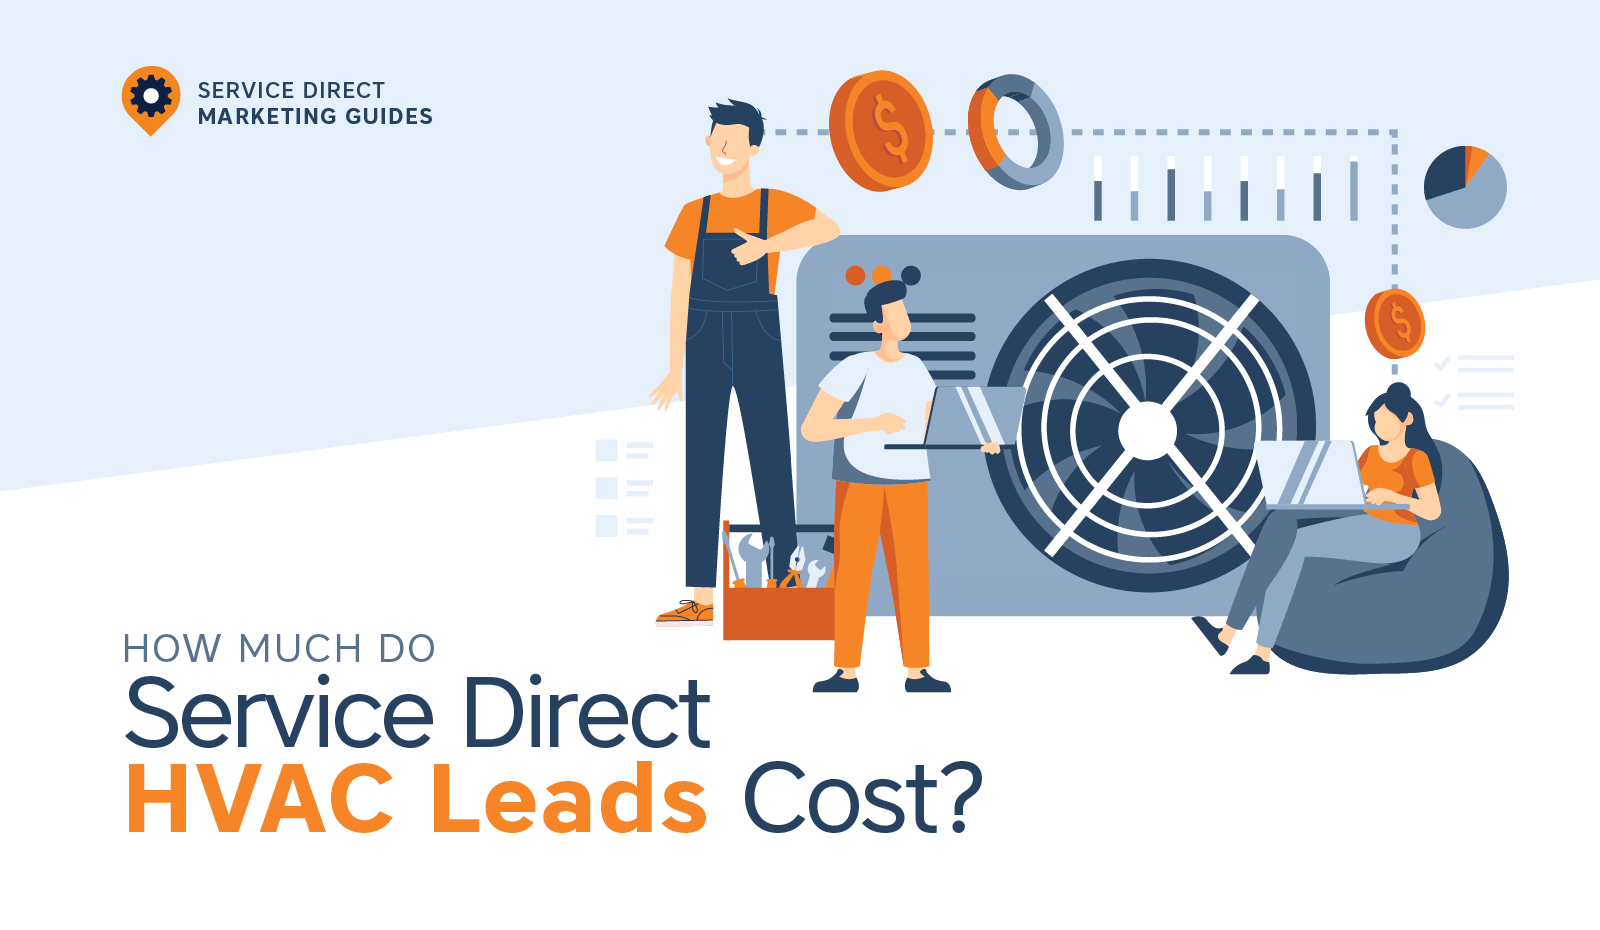 How Much Do Service Direct HVAC Leads Cost?